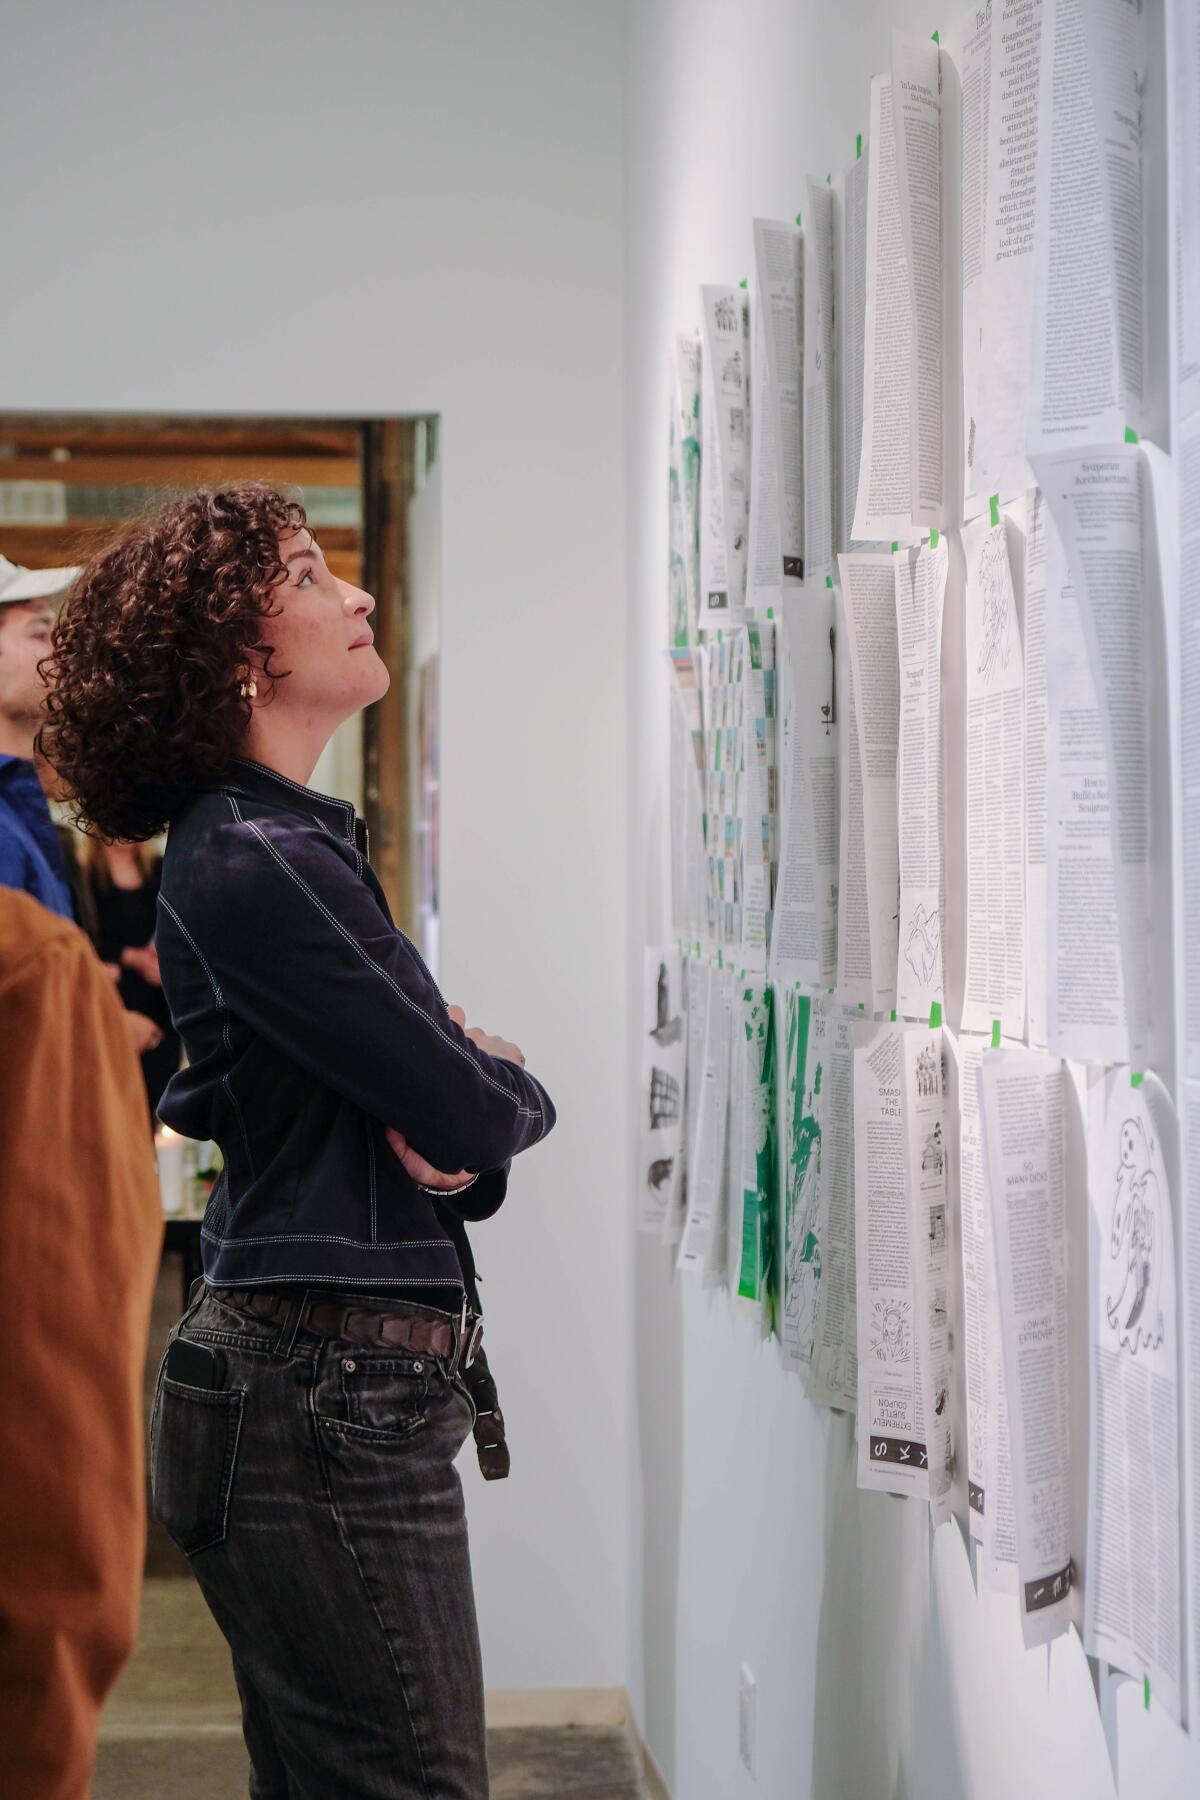 A woman with curly hair looks at a series of magazine spreads pinned to a wall inside a gallery.